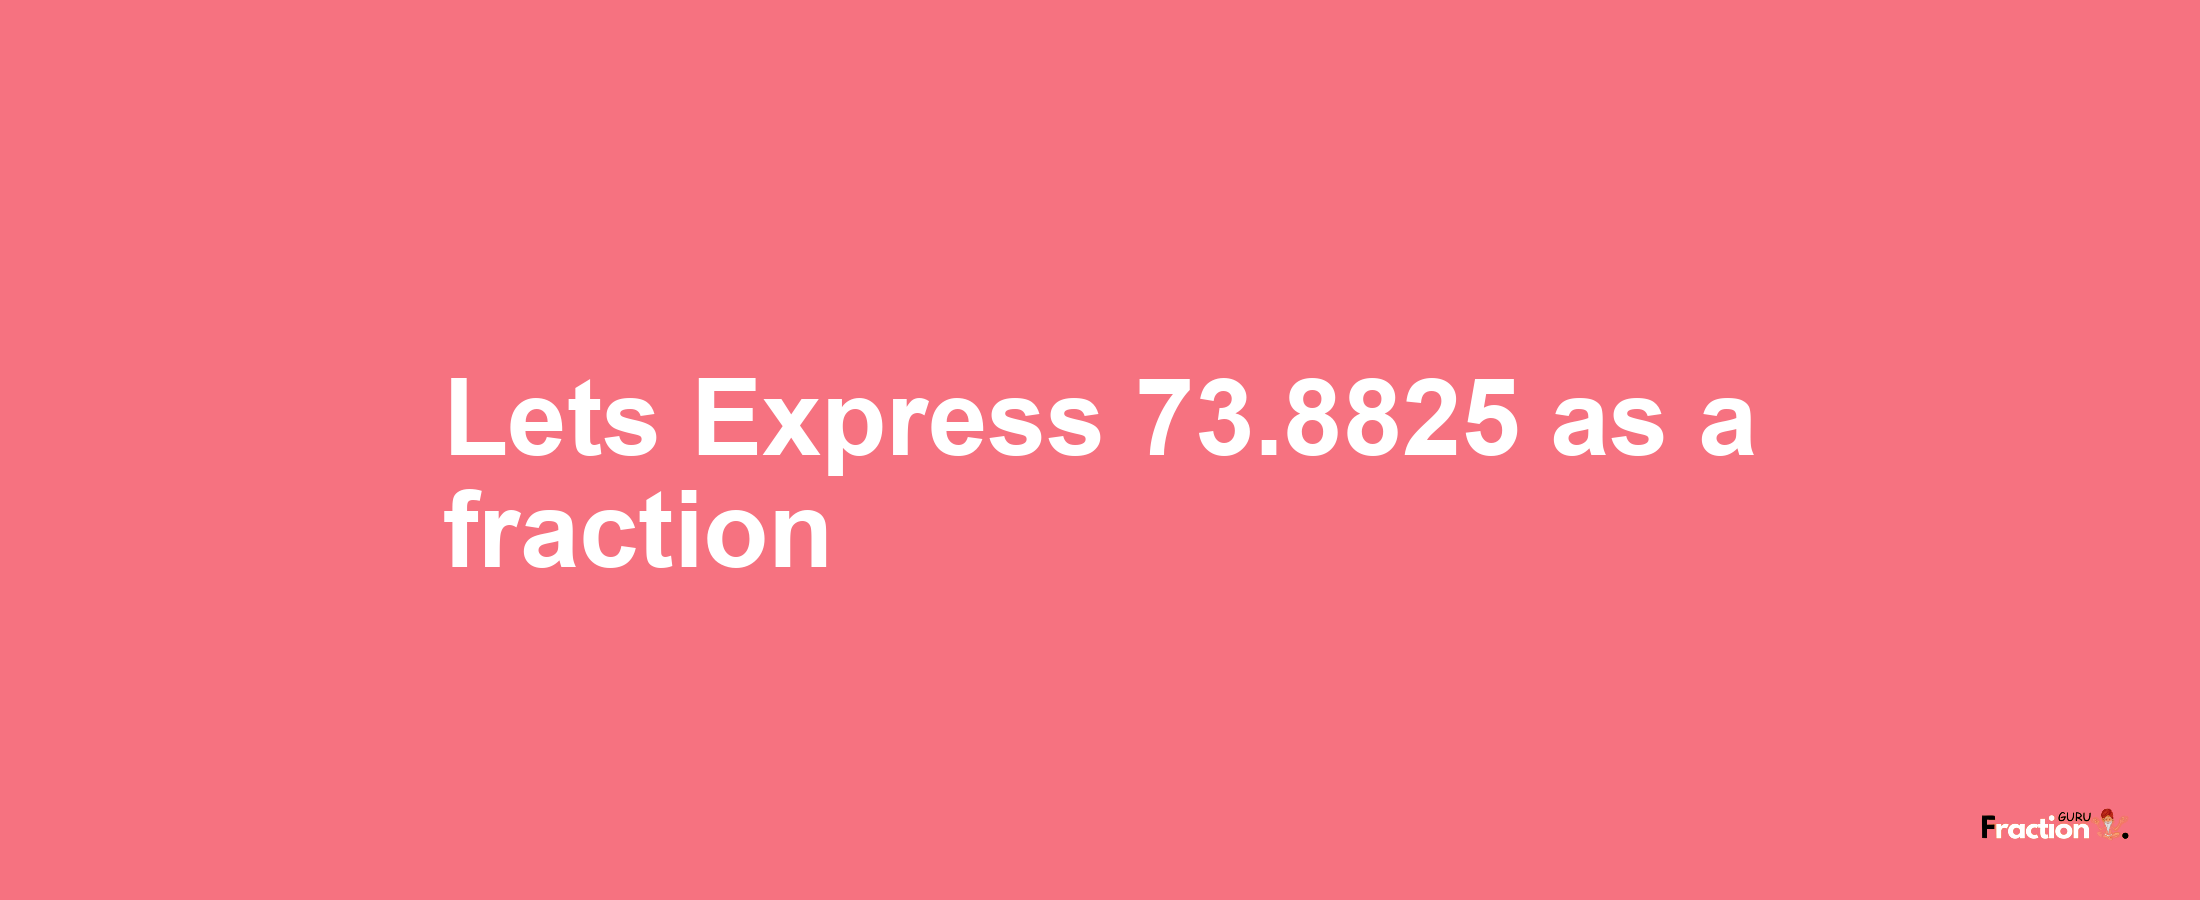 Lets Express 73.8825 as afraction